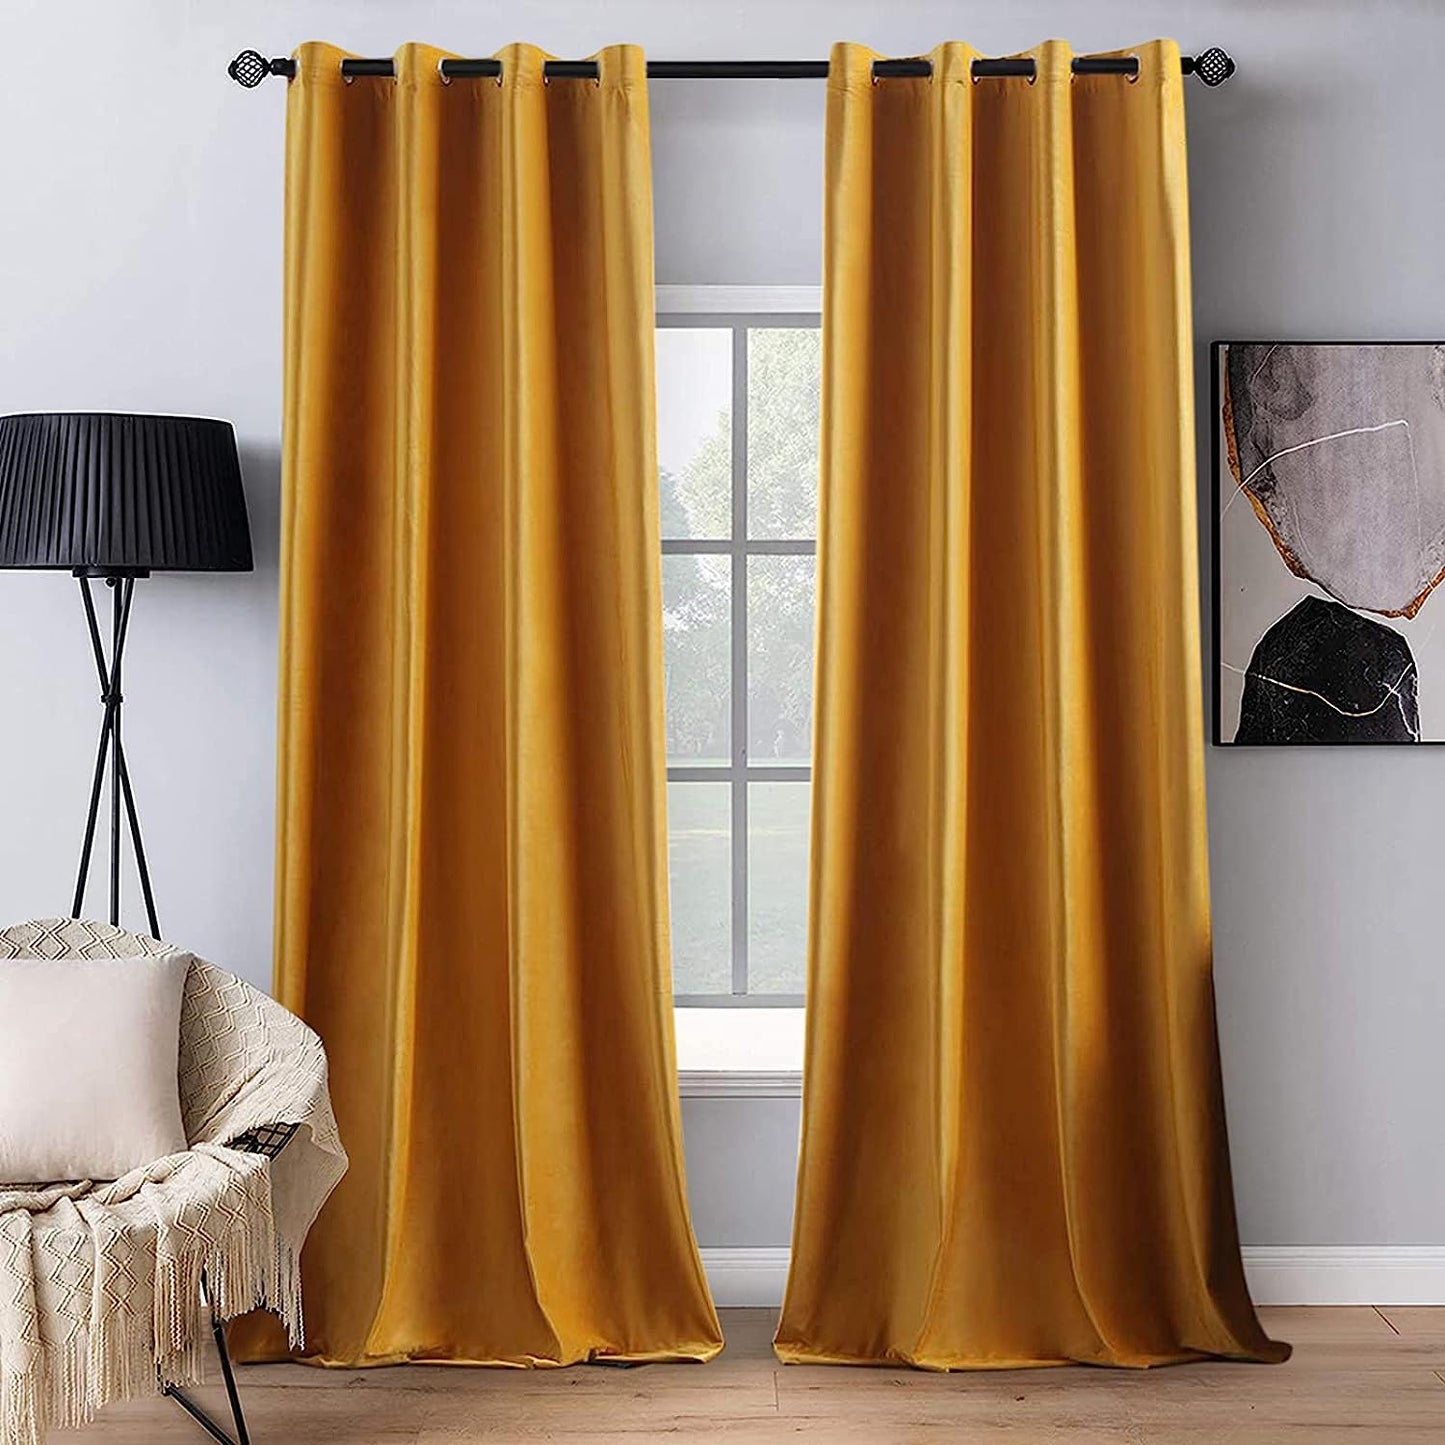 MIULEE Velvet Curtains Olive Green Elegant Grommet Curtains Thermal Insulated Soundproof Room Darkening Curtains/Drapes for Classical Living Room Bedroom Decor 52 X 84 Inch Set of 2  MIULEE Mustard Yellow W52 X L96 